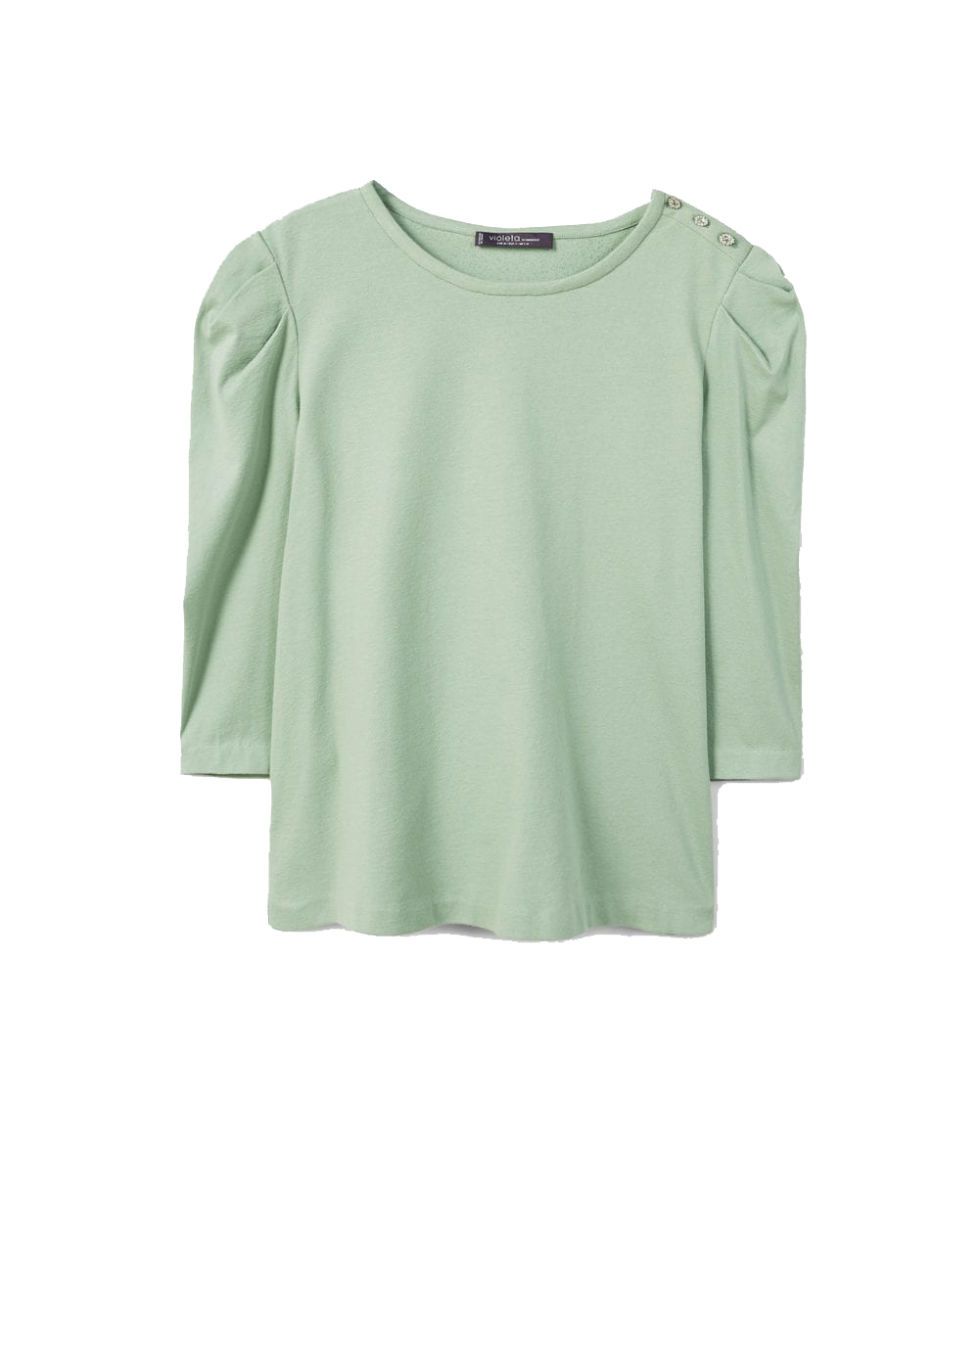 Clothing, T-shirt, White, Green, Sleeve, Blouse, Top, Outerwear, Neck, Jersey, 